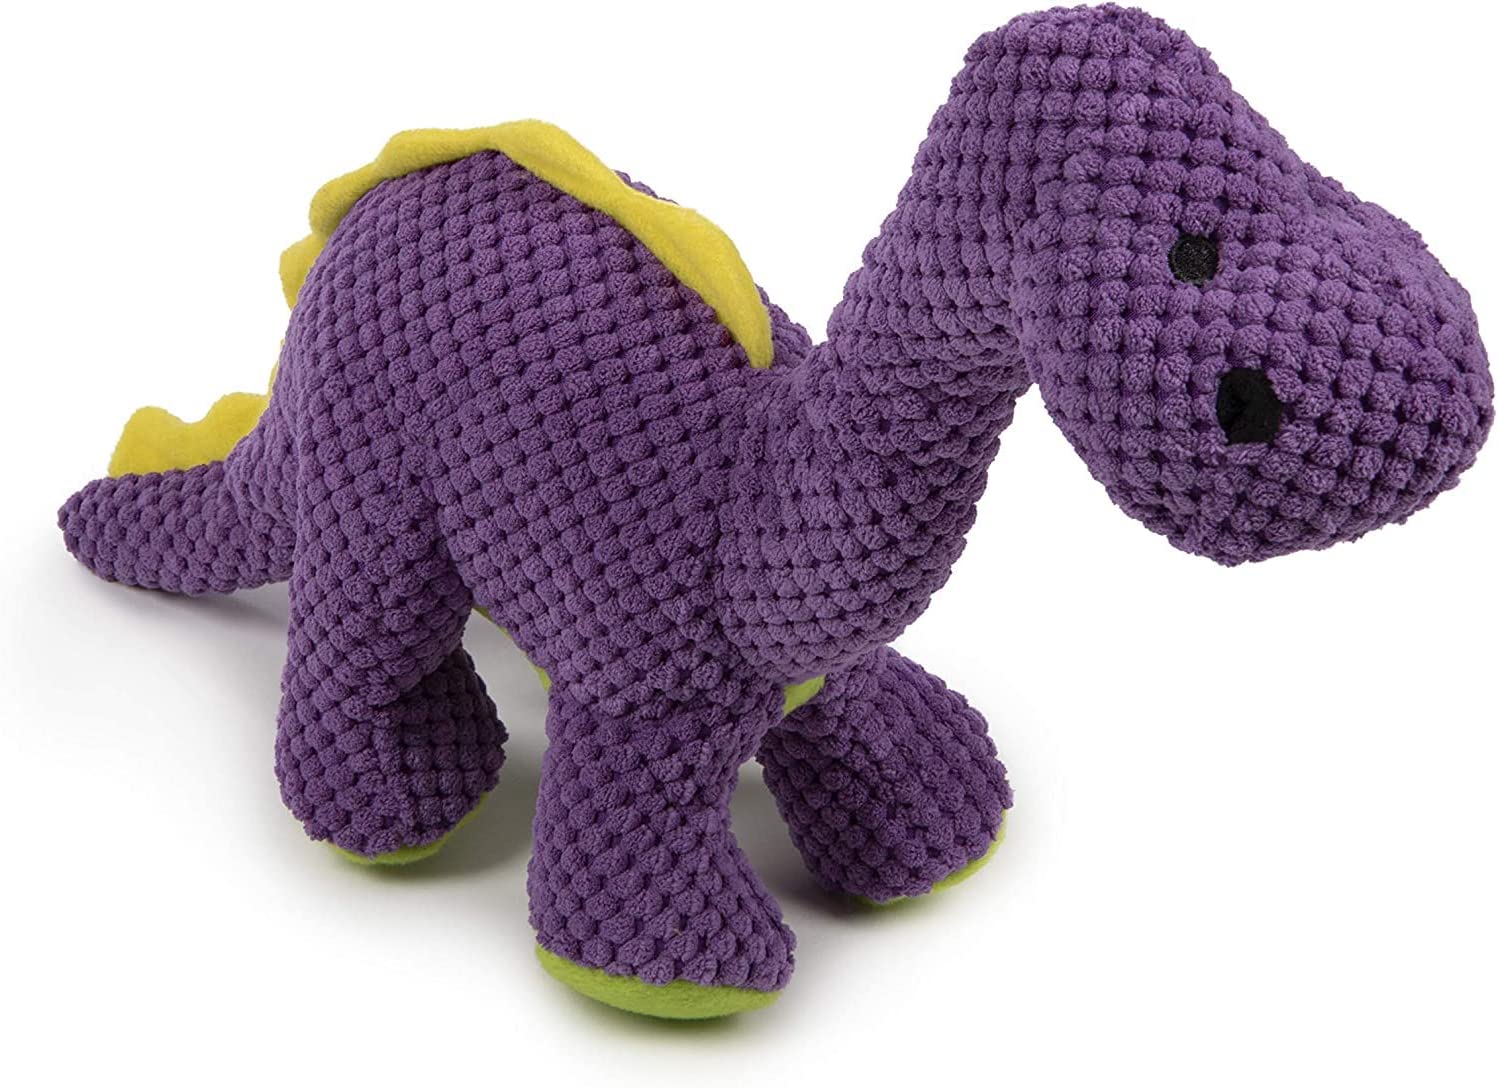 goDog Checkers Plush & PlayClean Large Purple Squeaky Dog Toy (Checkers Dinos Bruto) $7.48 + Free S&H w/ Prime or $25+